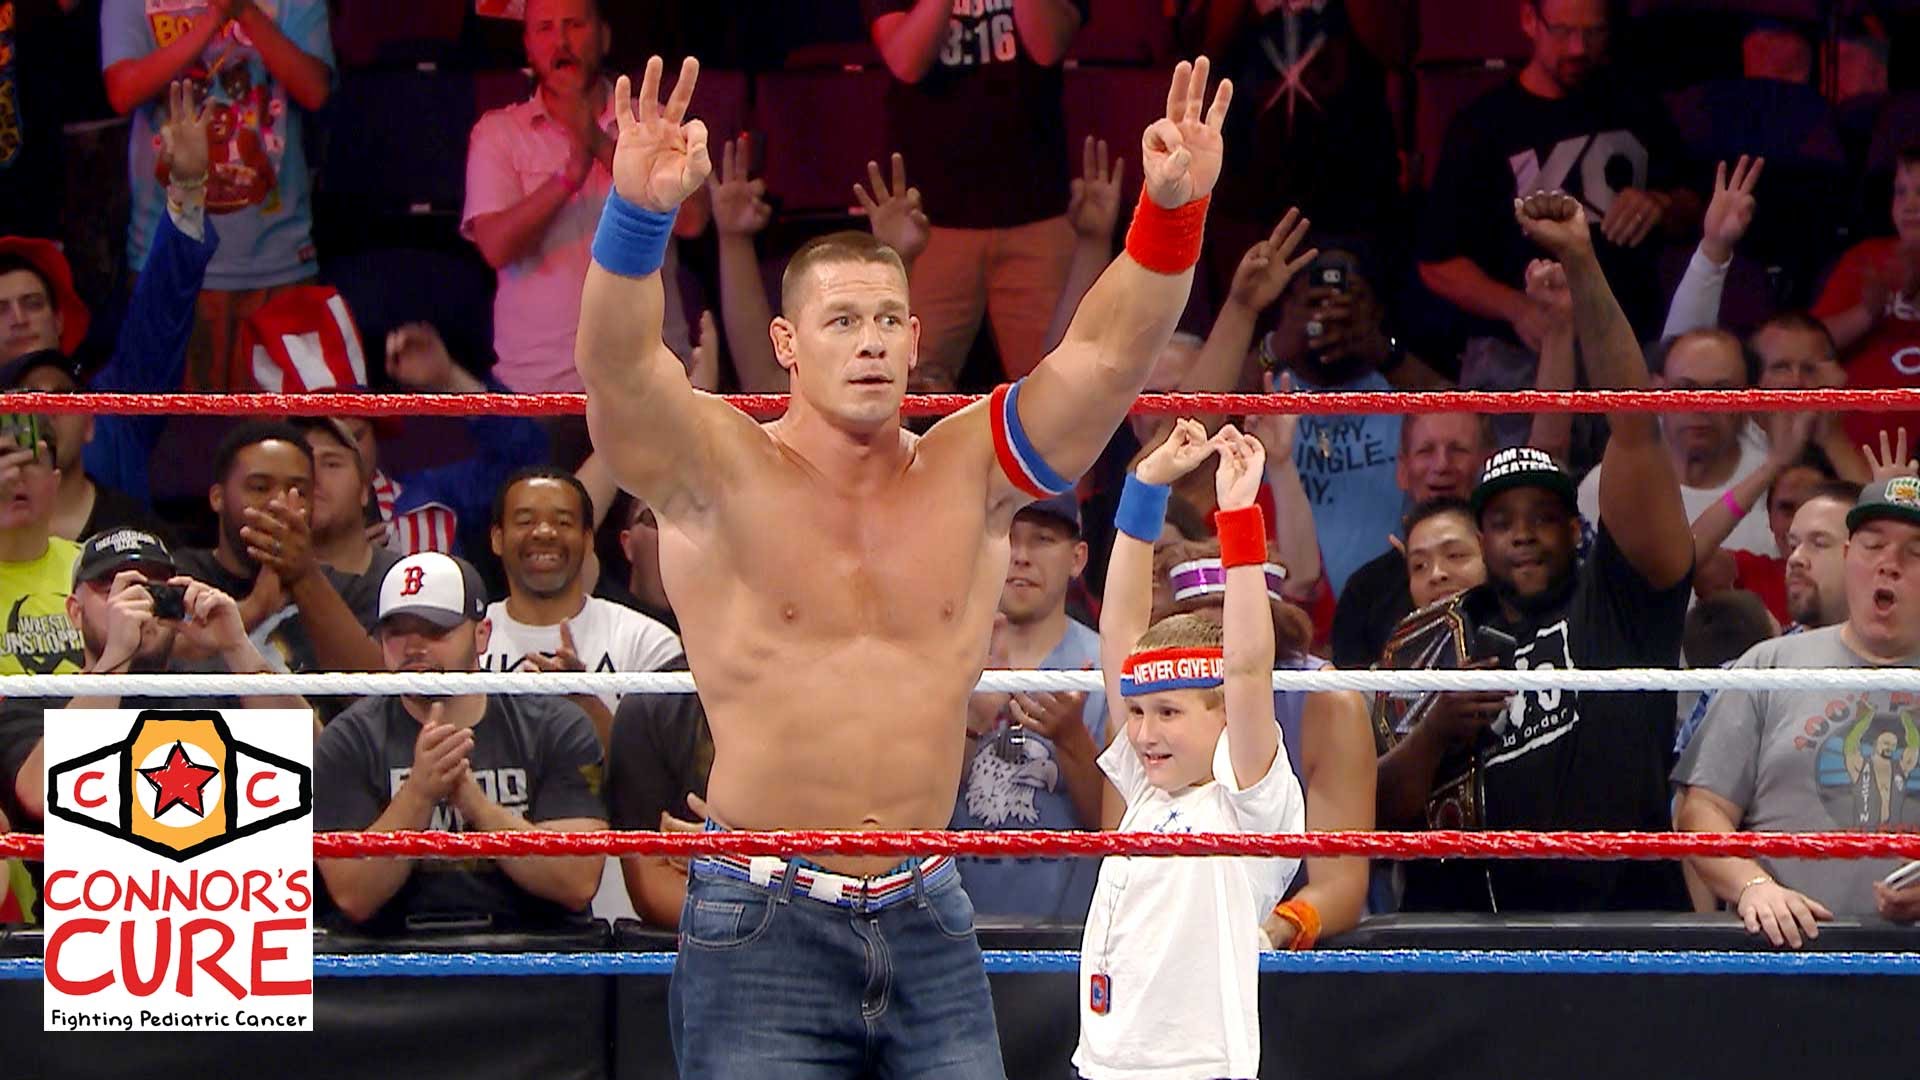 John Cena brings a young fan who beat cancer into the WWE ring